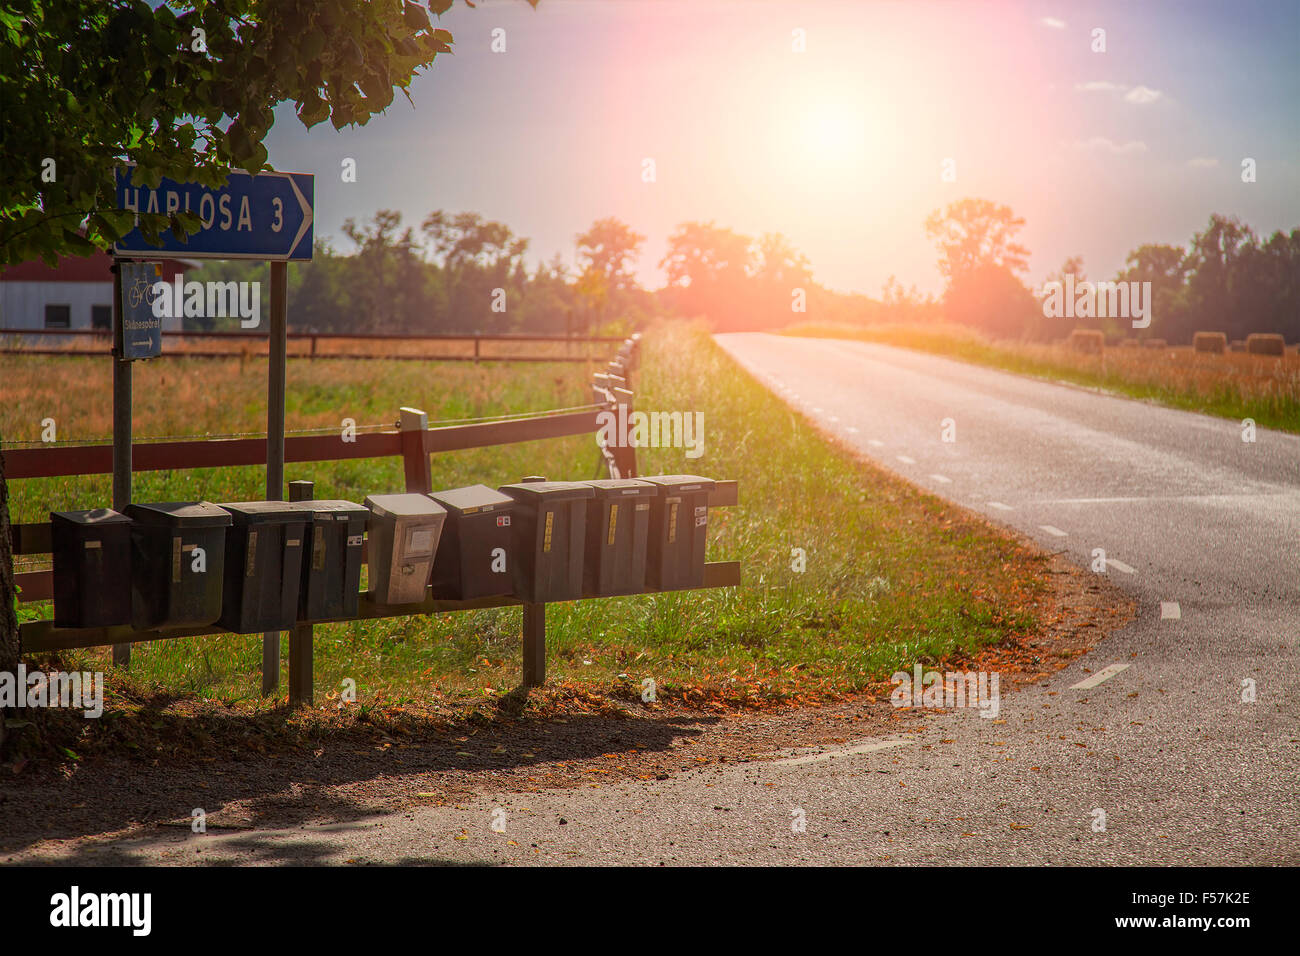 Image of old postboxes on a countryside road. South Sweden. Stock Photo